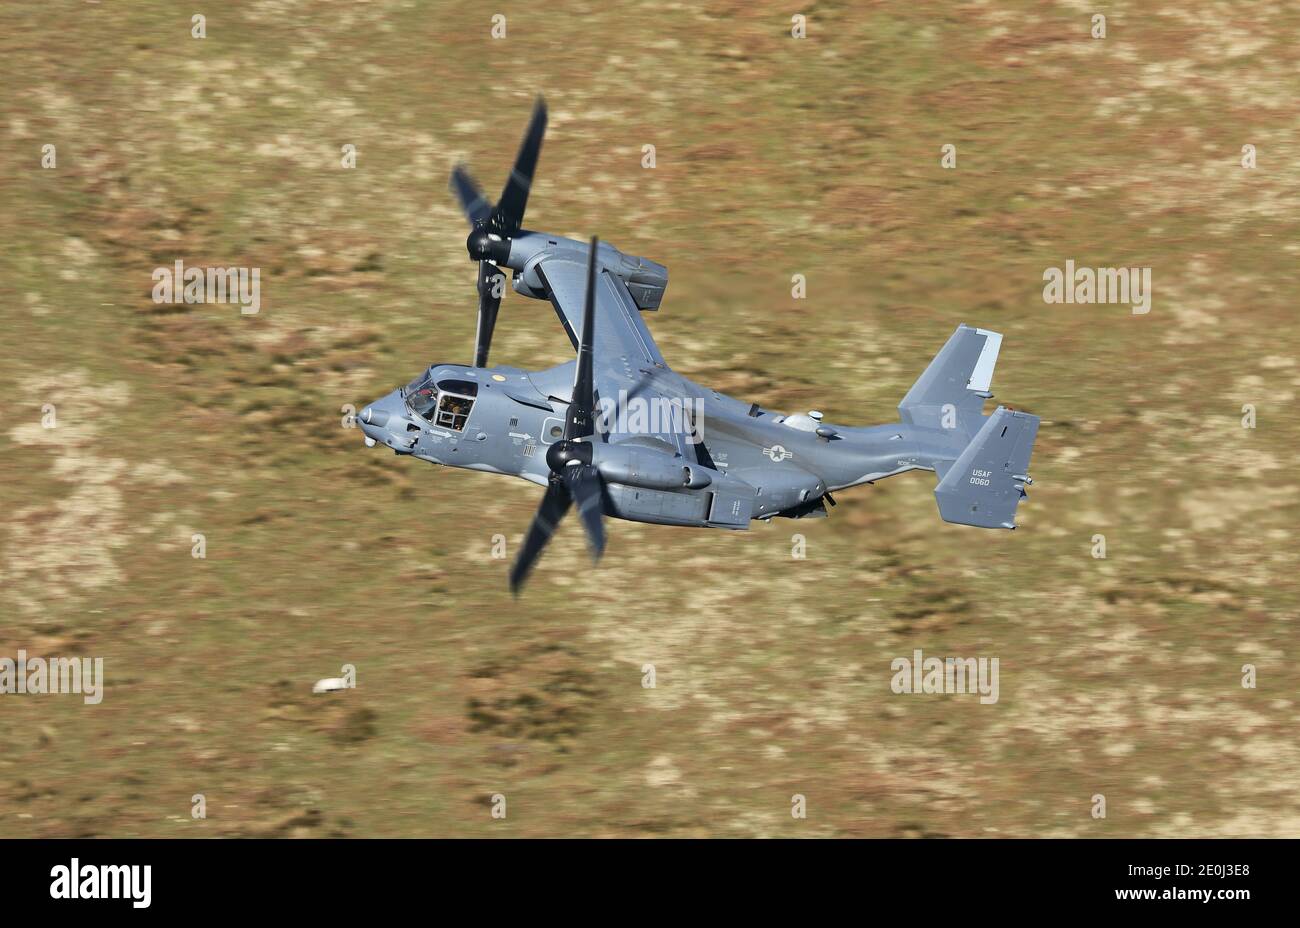 USAF CV-22 Osprey tiltrotor aircraft flying in the 'mach loop' area of Wales, UK. Stock Photo